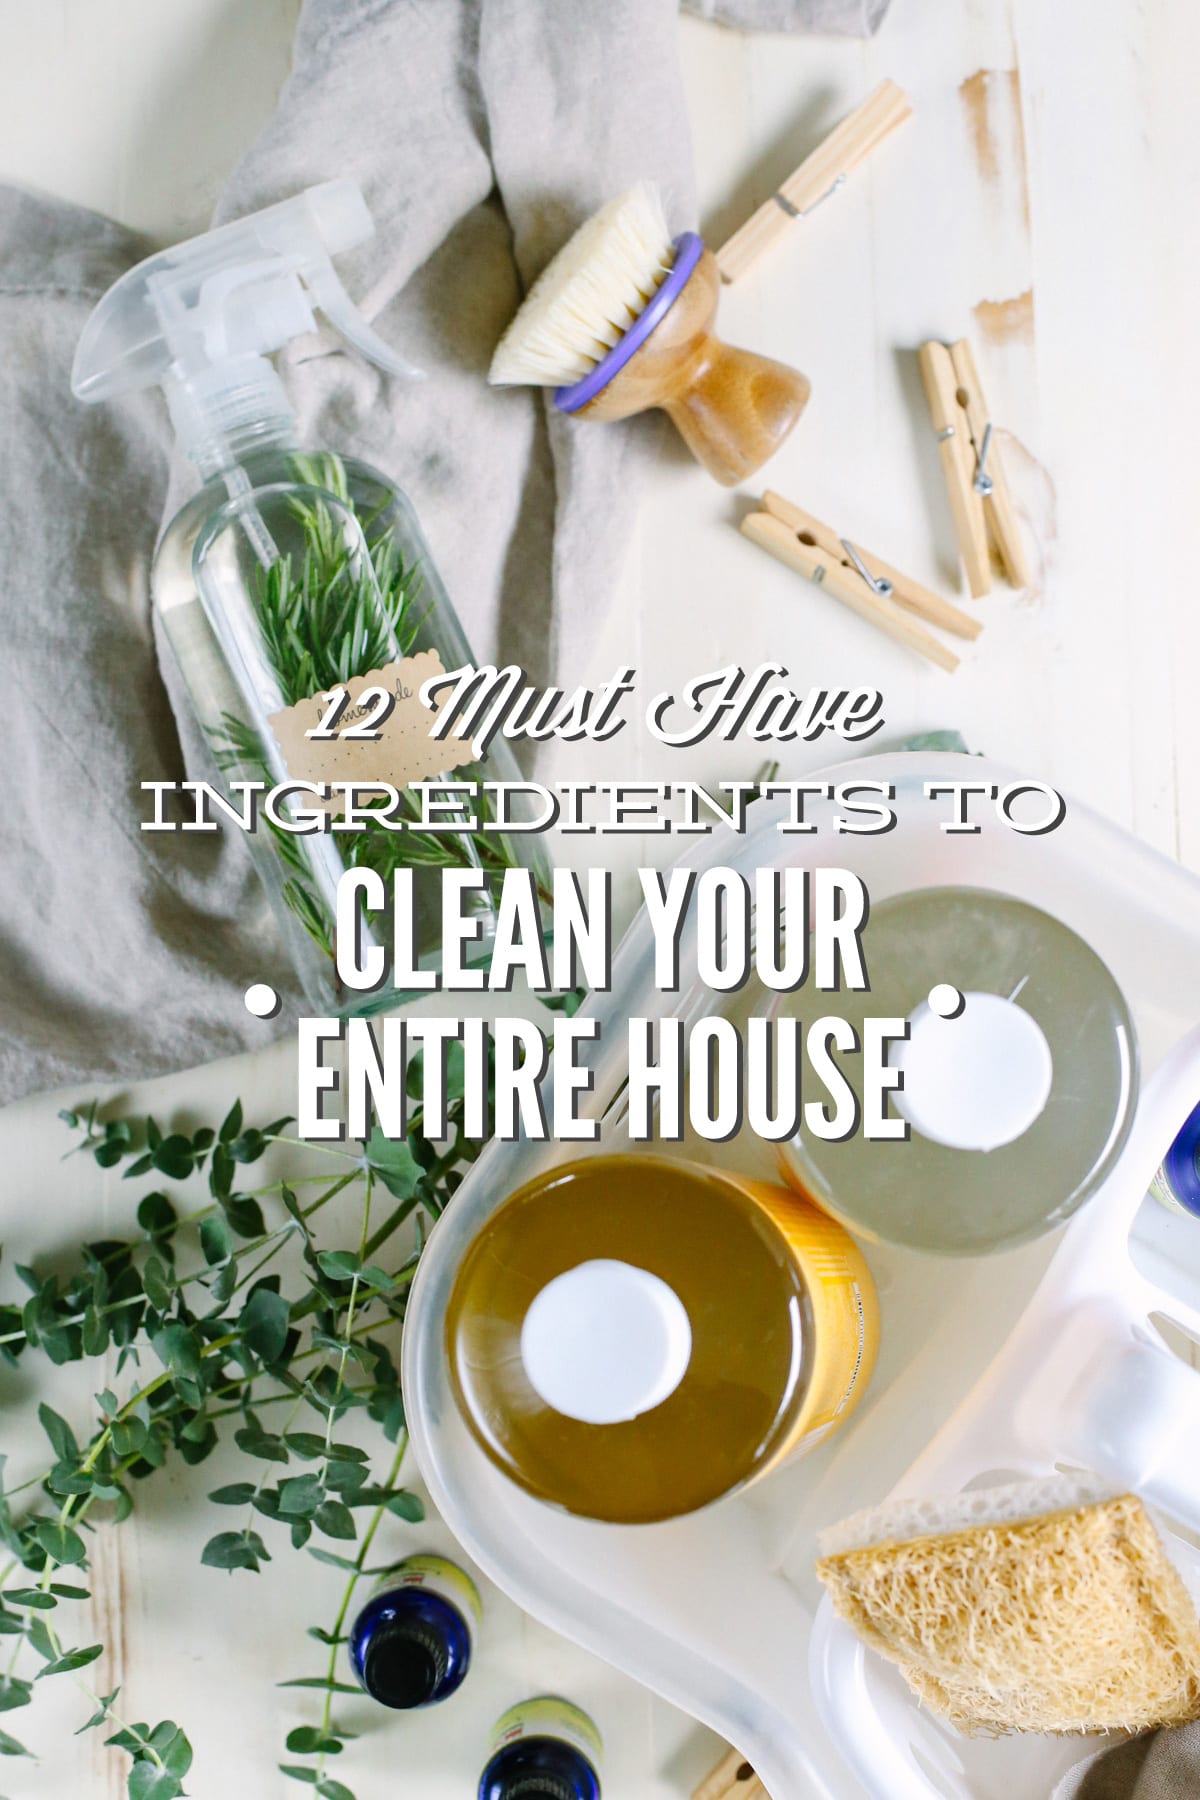 12 Must-Have Ingredients to Clean Your Entire House, Naturally